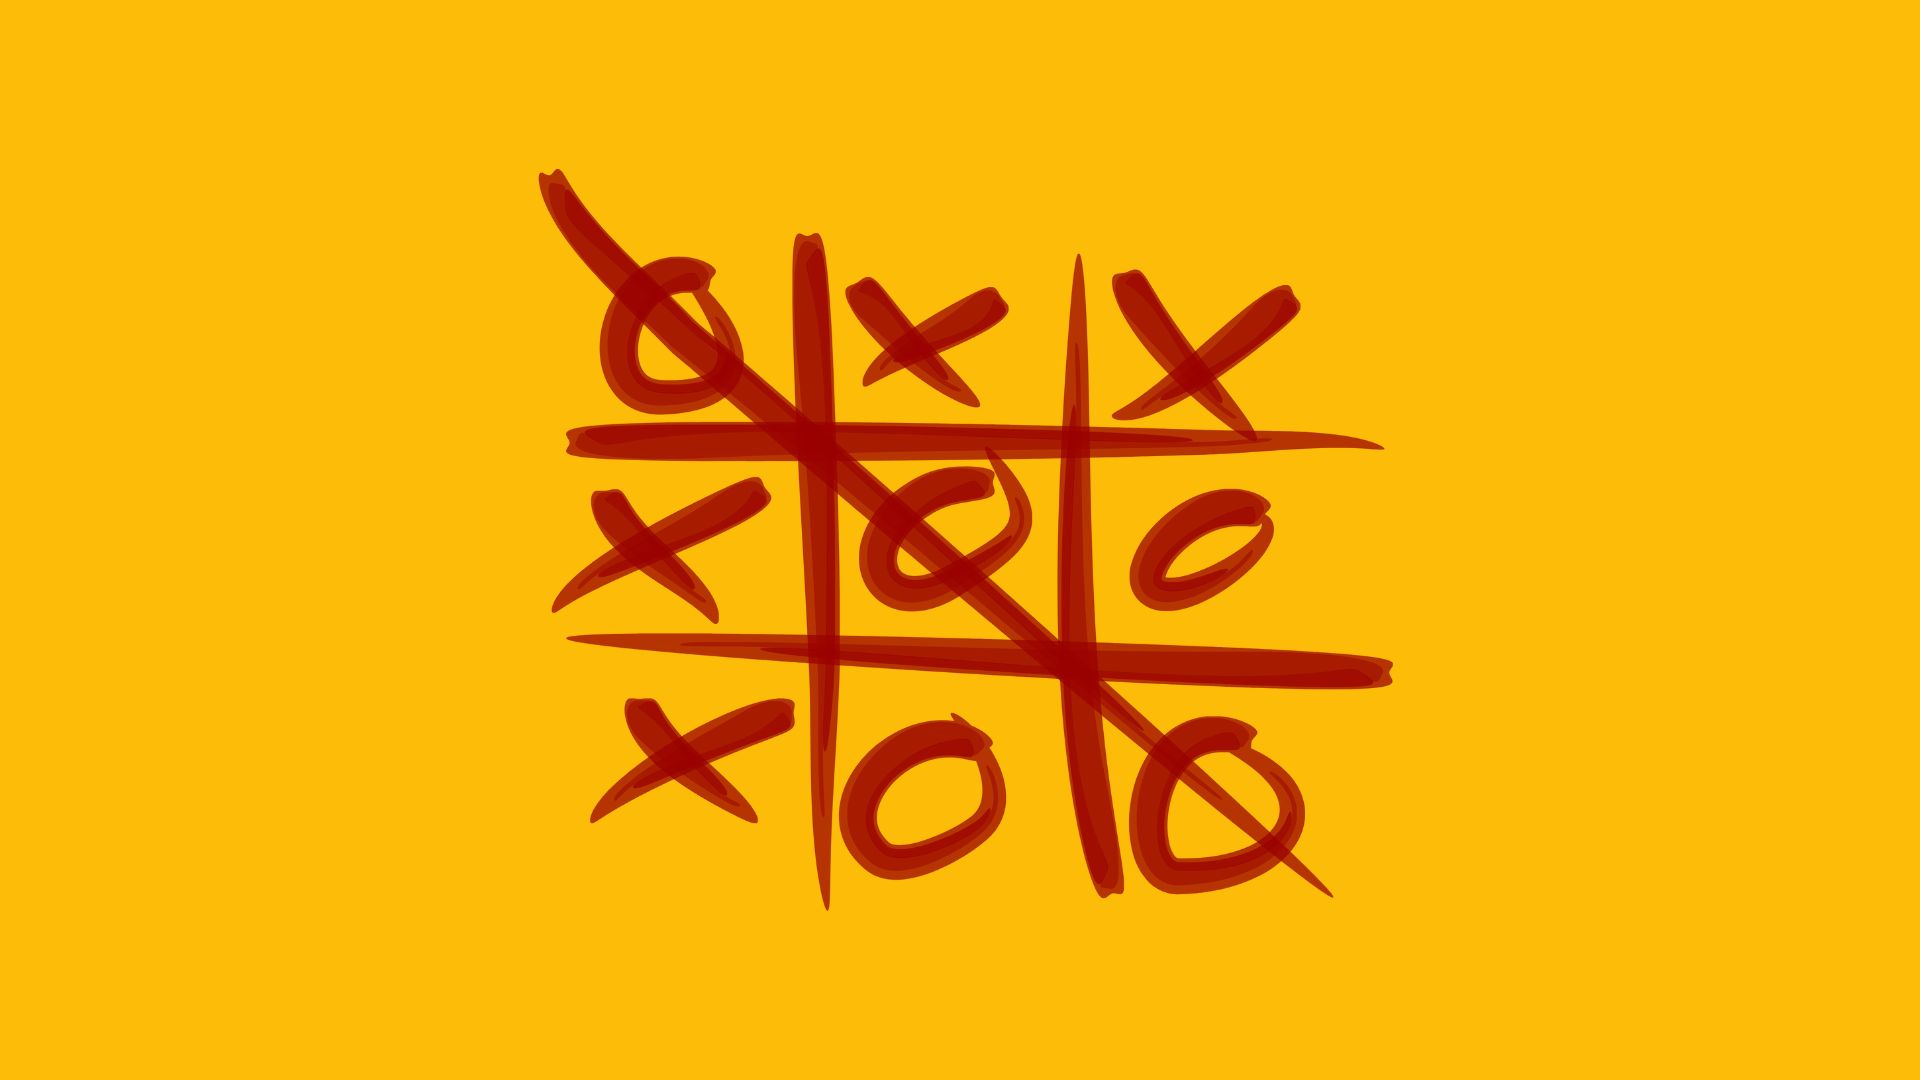 Super Tic-Tac-Toe - An online multiplayer game with a twist on the